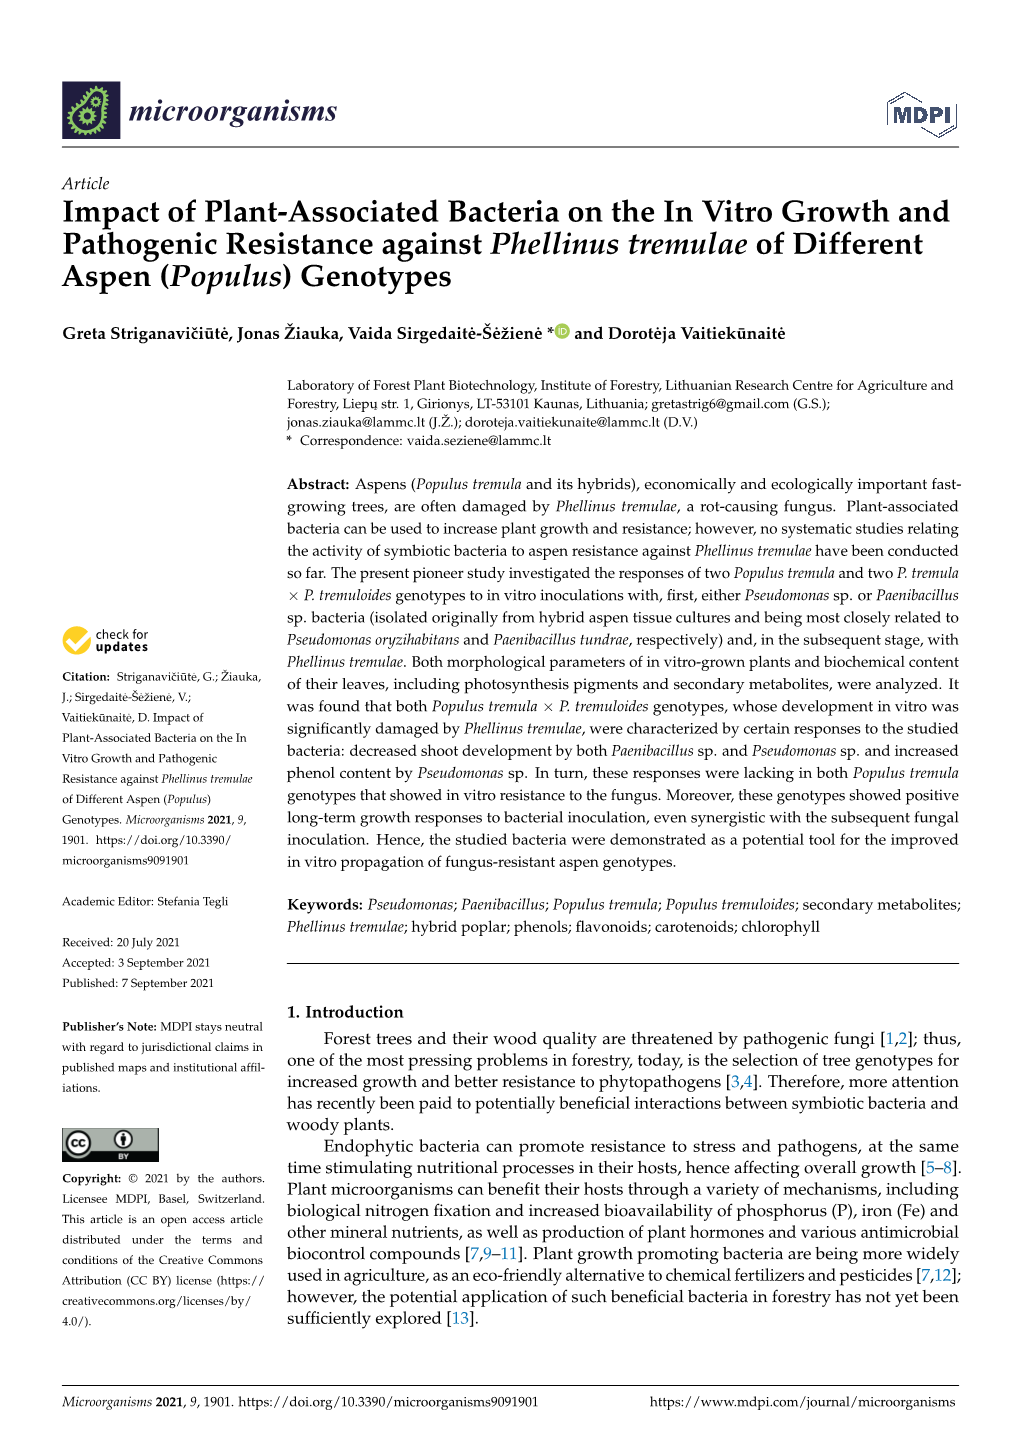 Impact of Plant-Associated Bacteria on the in Vitro Growth and Pathogenic Resistance Against Phellinus Tremulae of Different Aspen (Populus) Genotypes